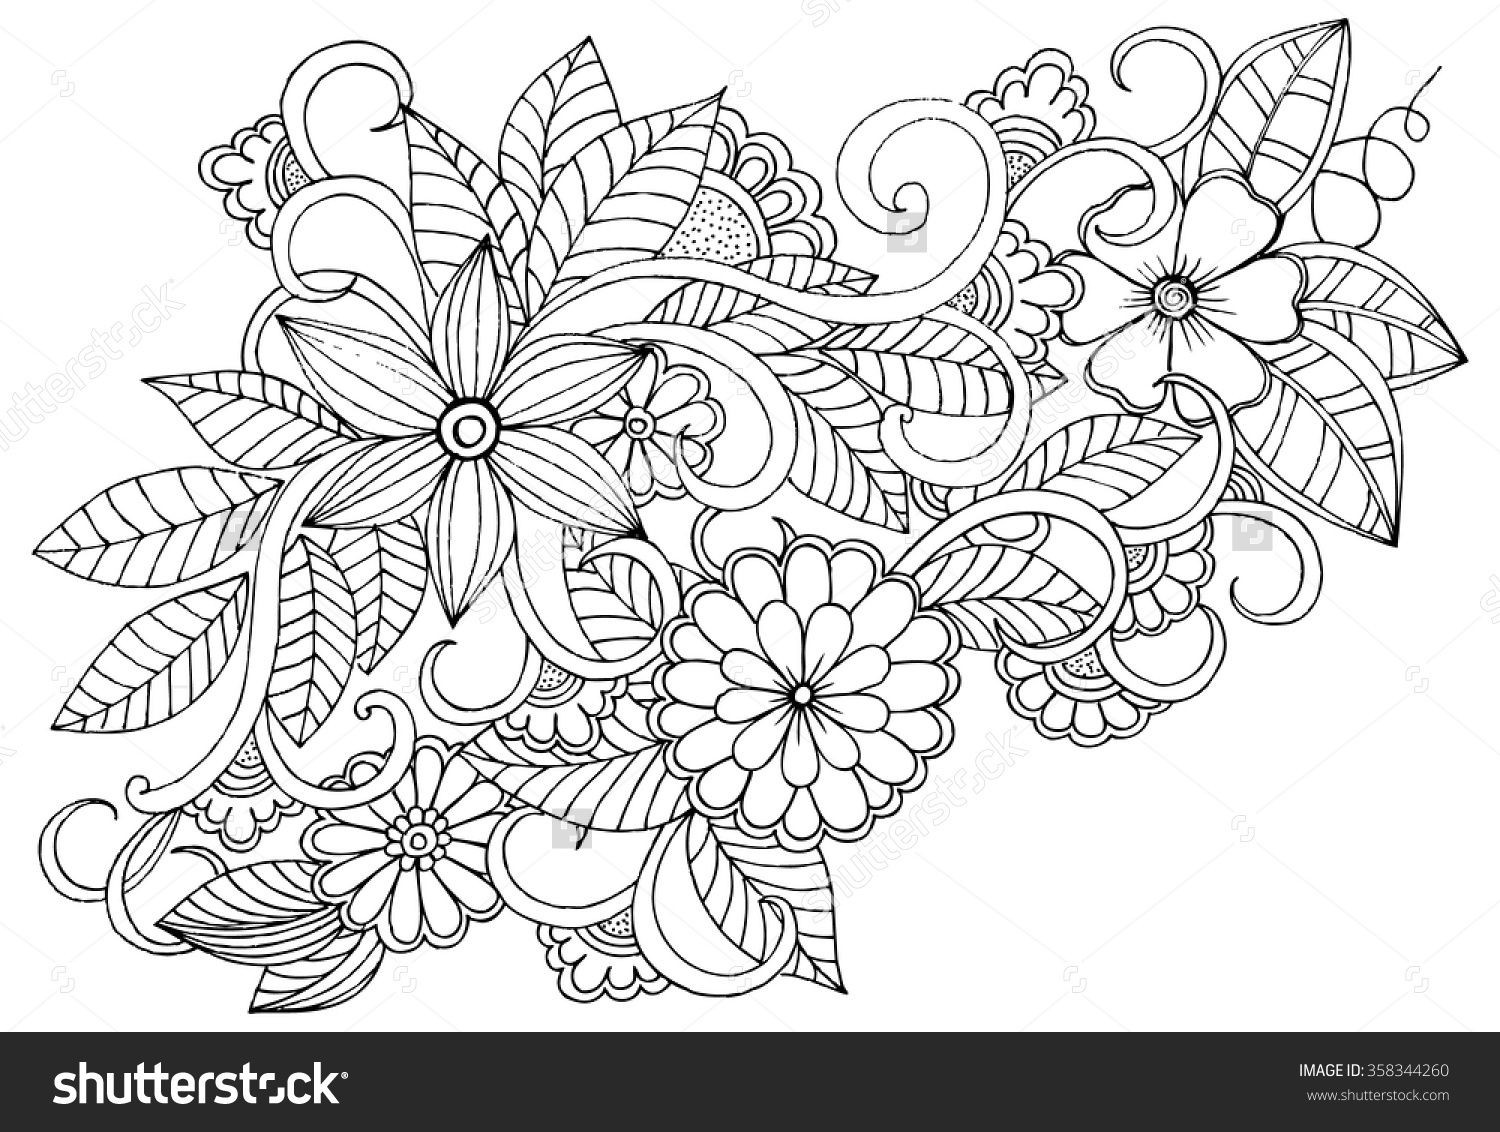 Adult Coloring Pages Patterns Flowers
 Doodle floral pattern in black and white Page for